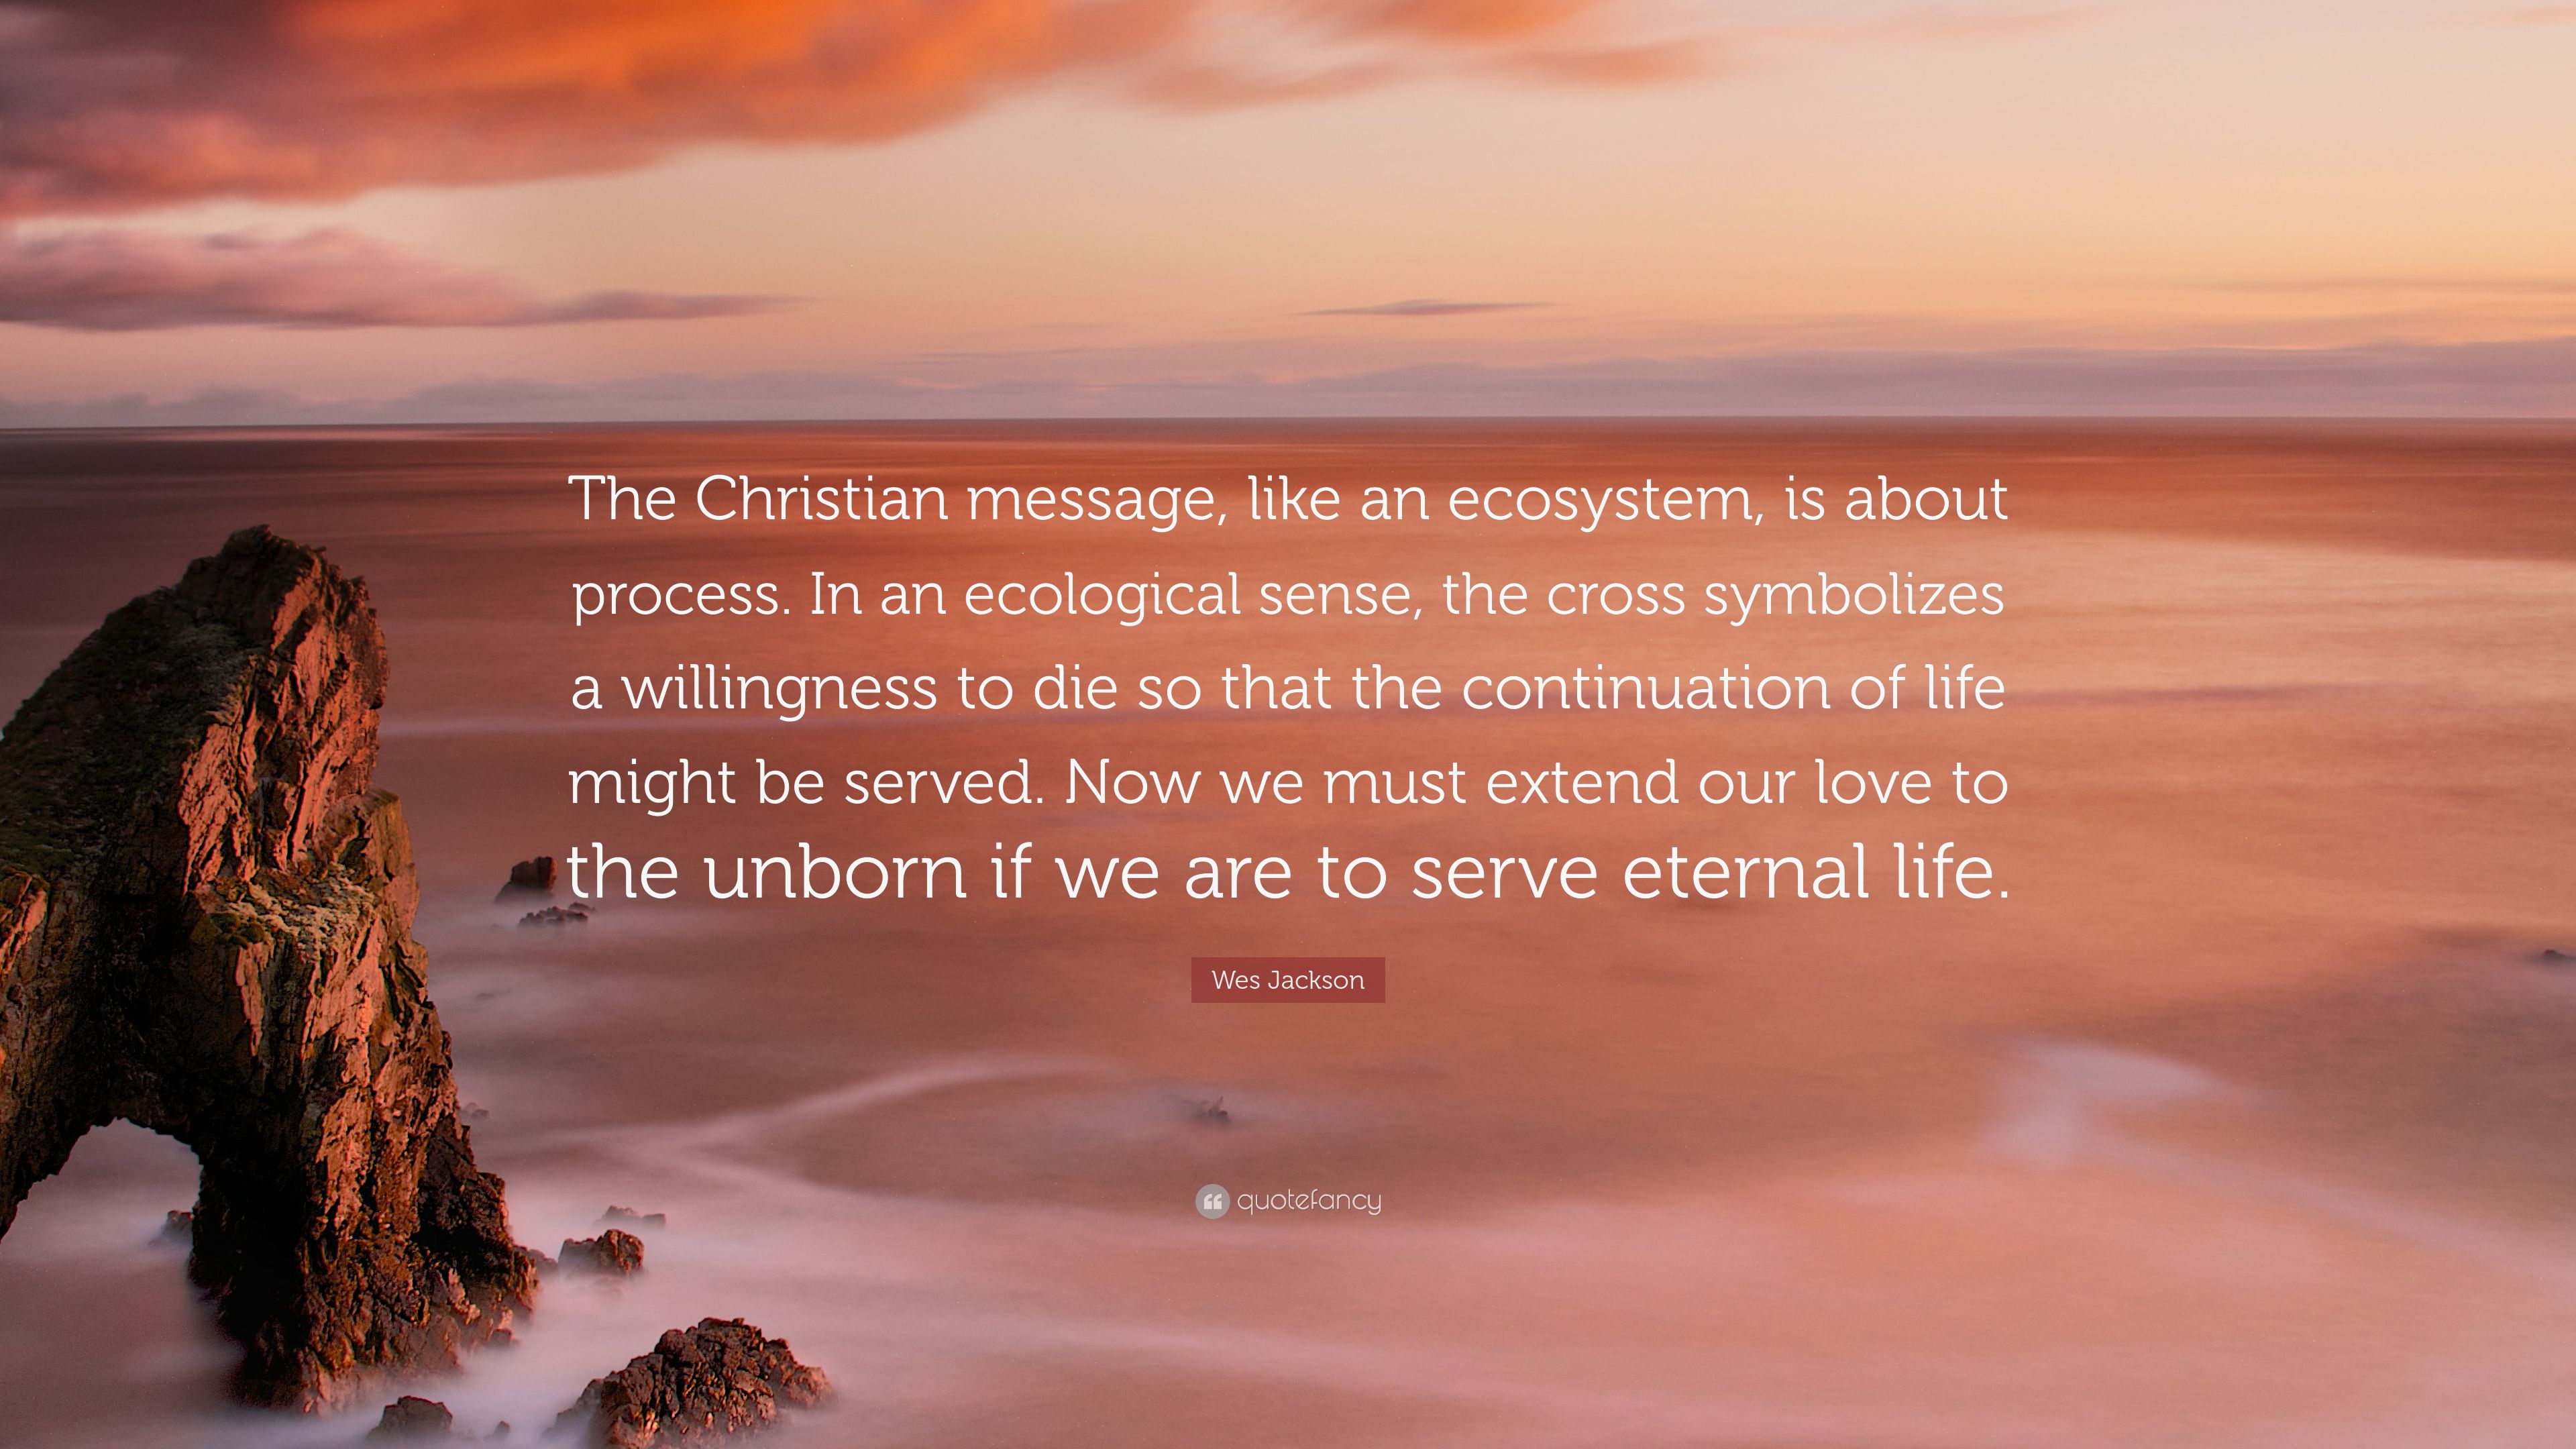 Wes Jackson Quote: “The Christian message, like an ecosystem, is